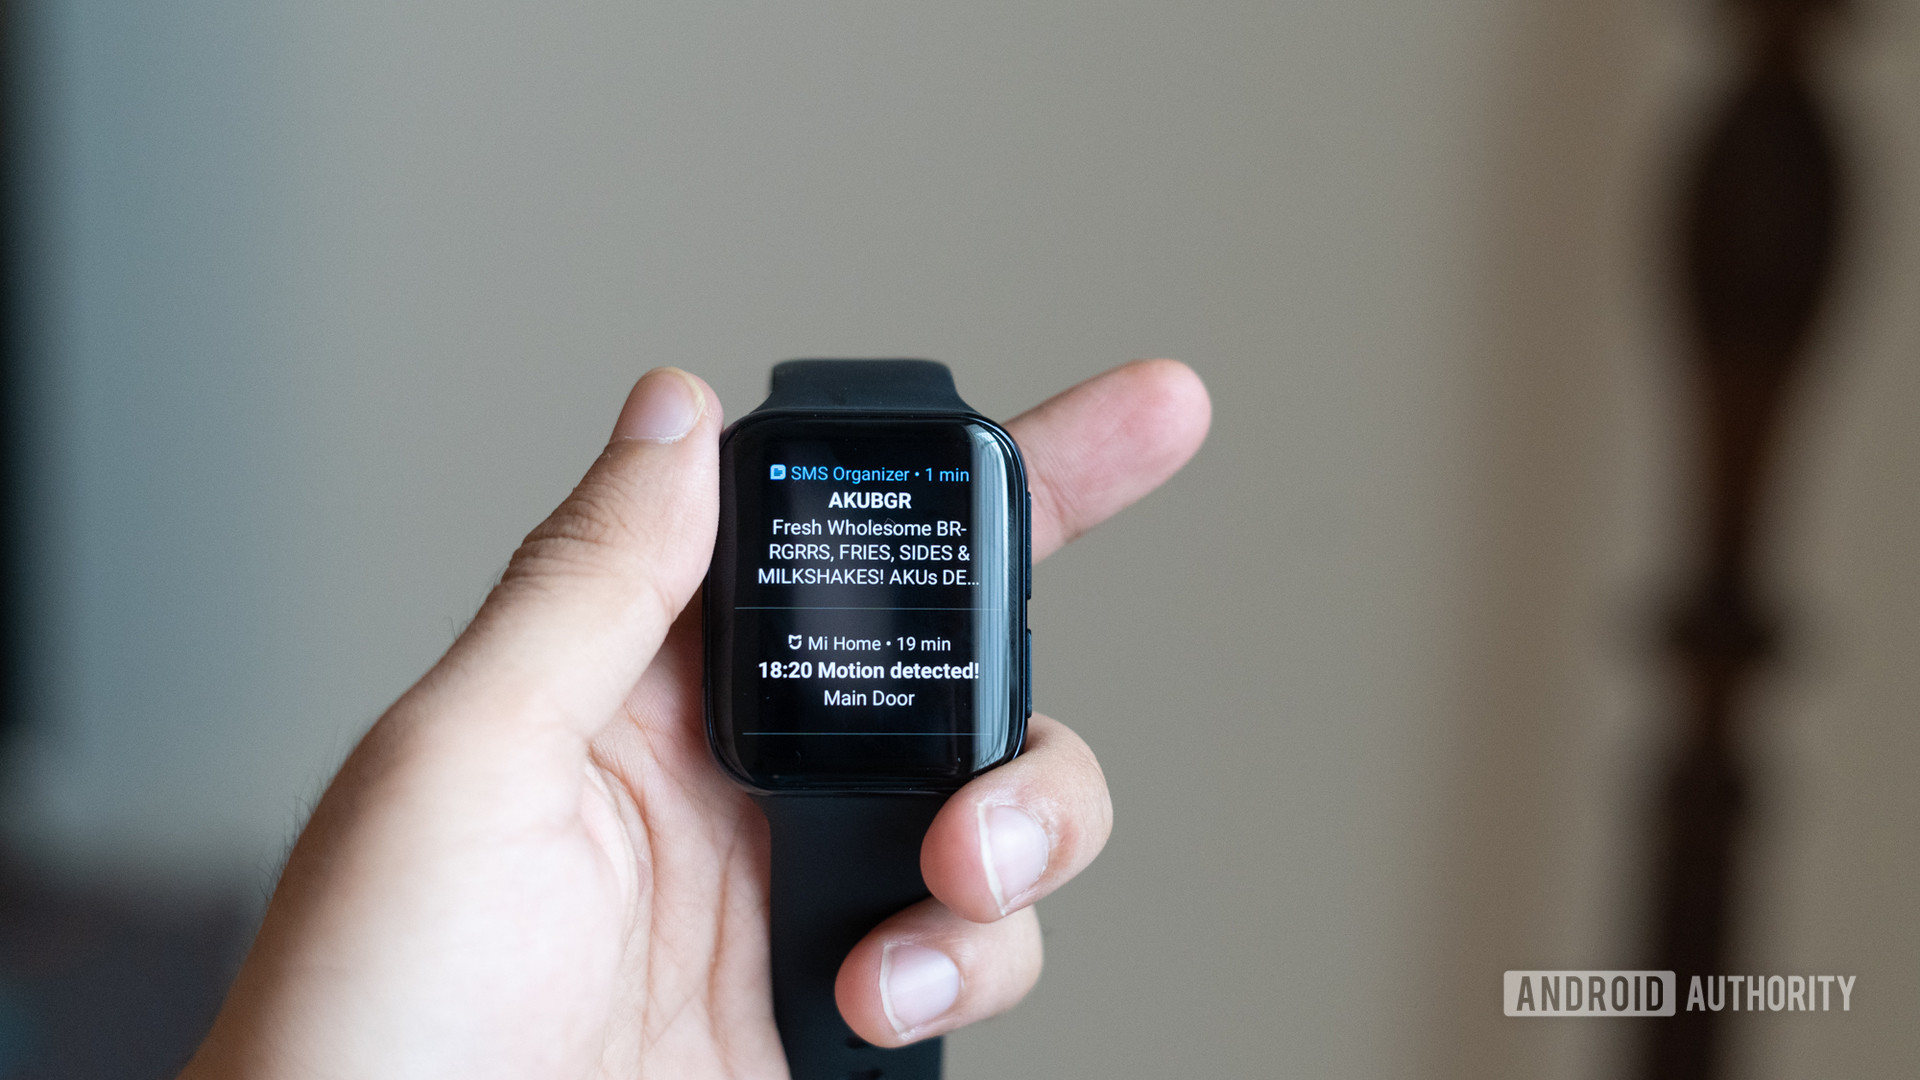 Oppo Watch in hand showing notifications